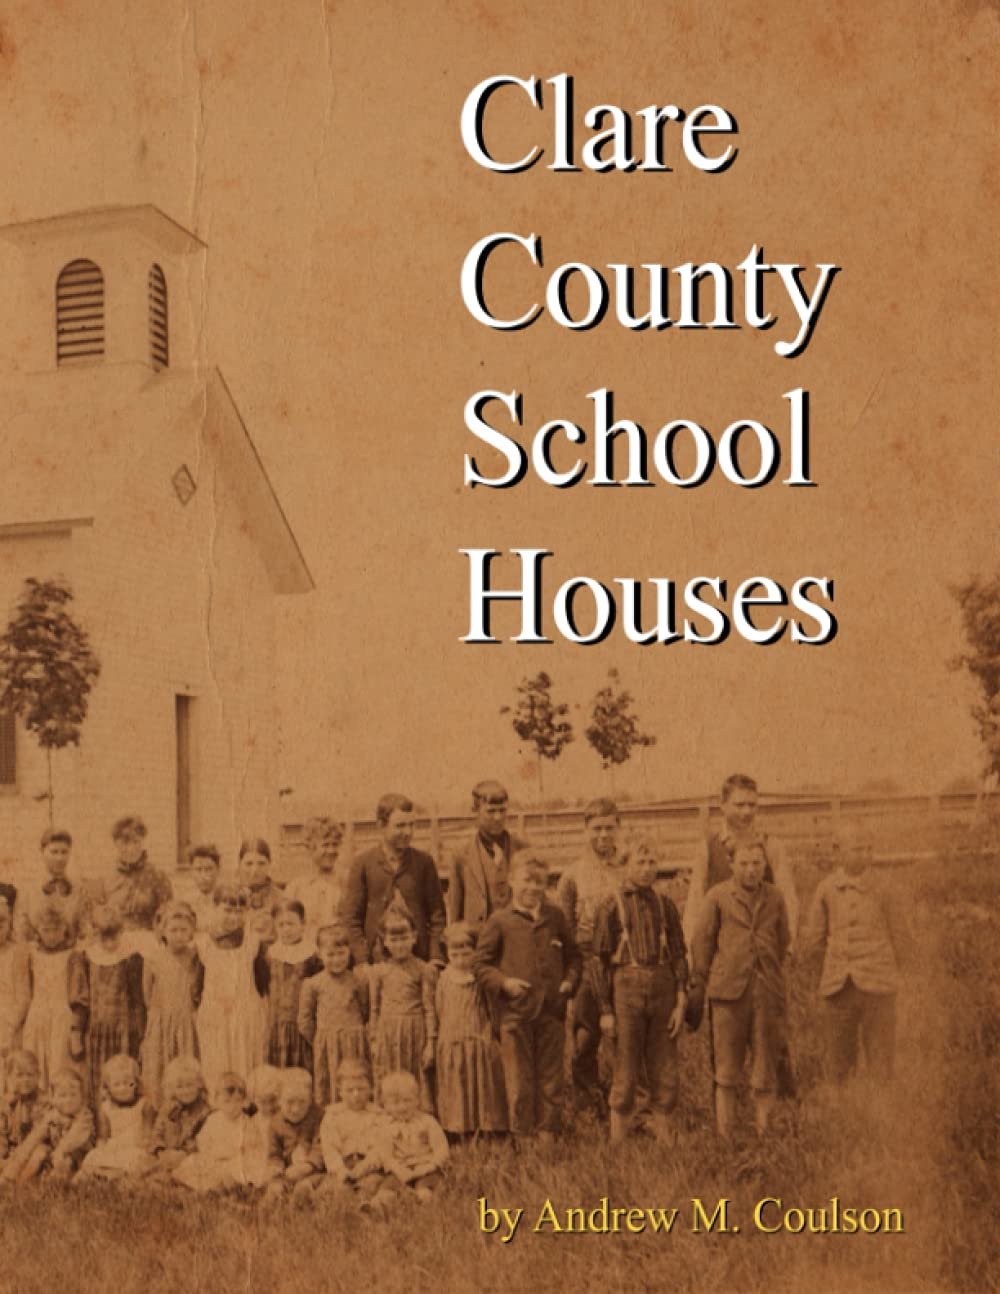 Clare County Historical Society Member Andrew M. Coulson's recently published book about schools in Clare County is available at the Clare County Cleaver and on Amazon.